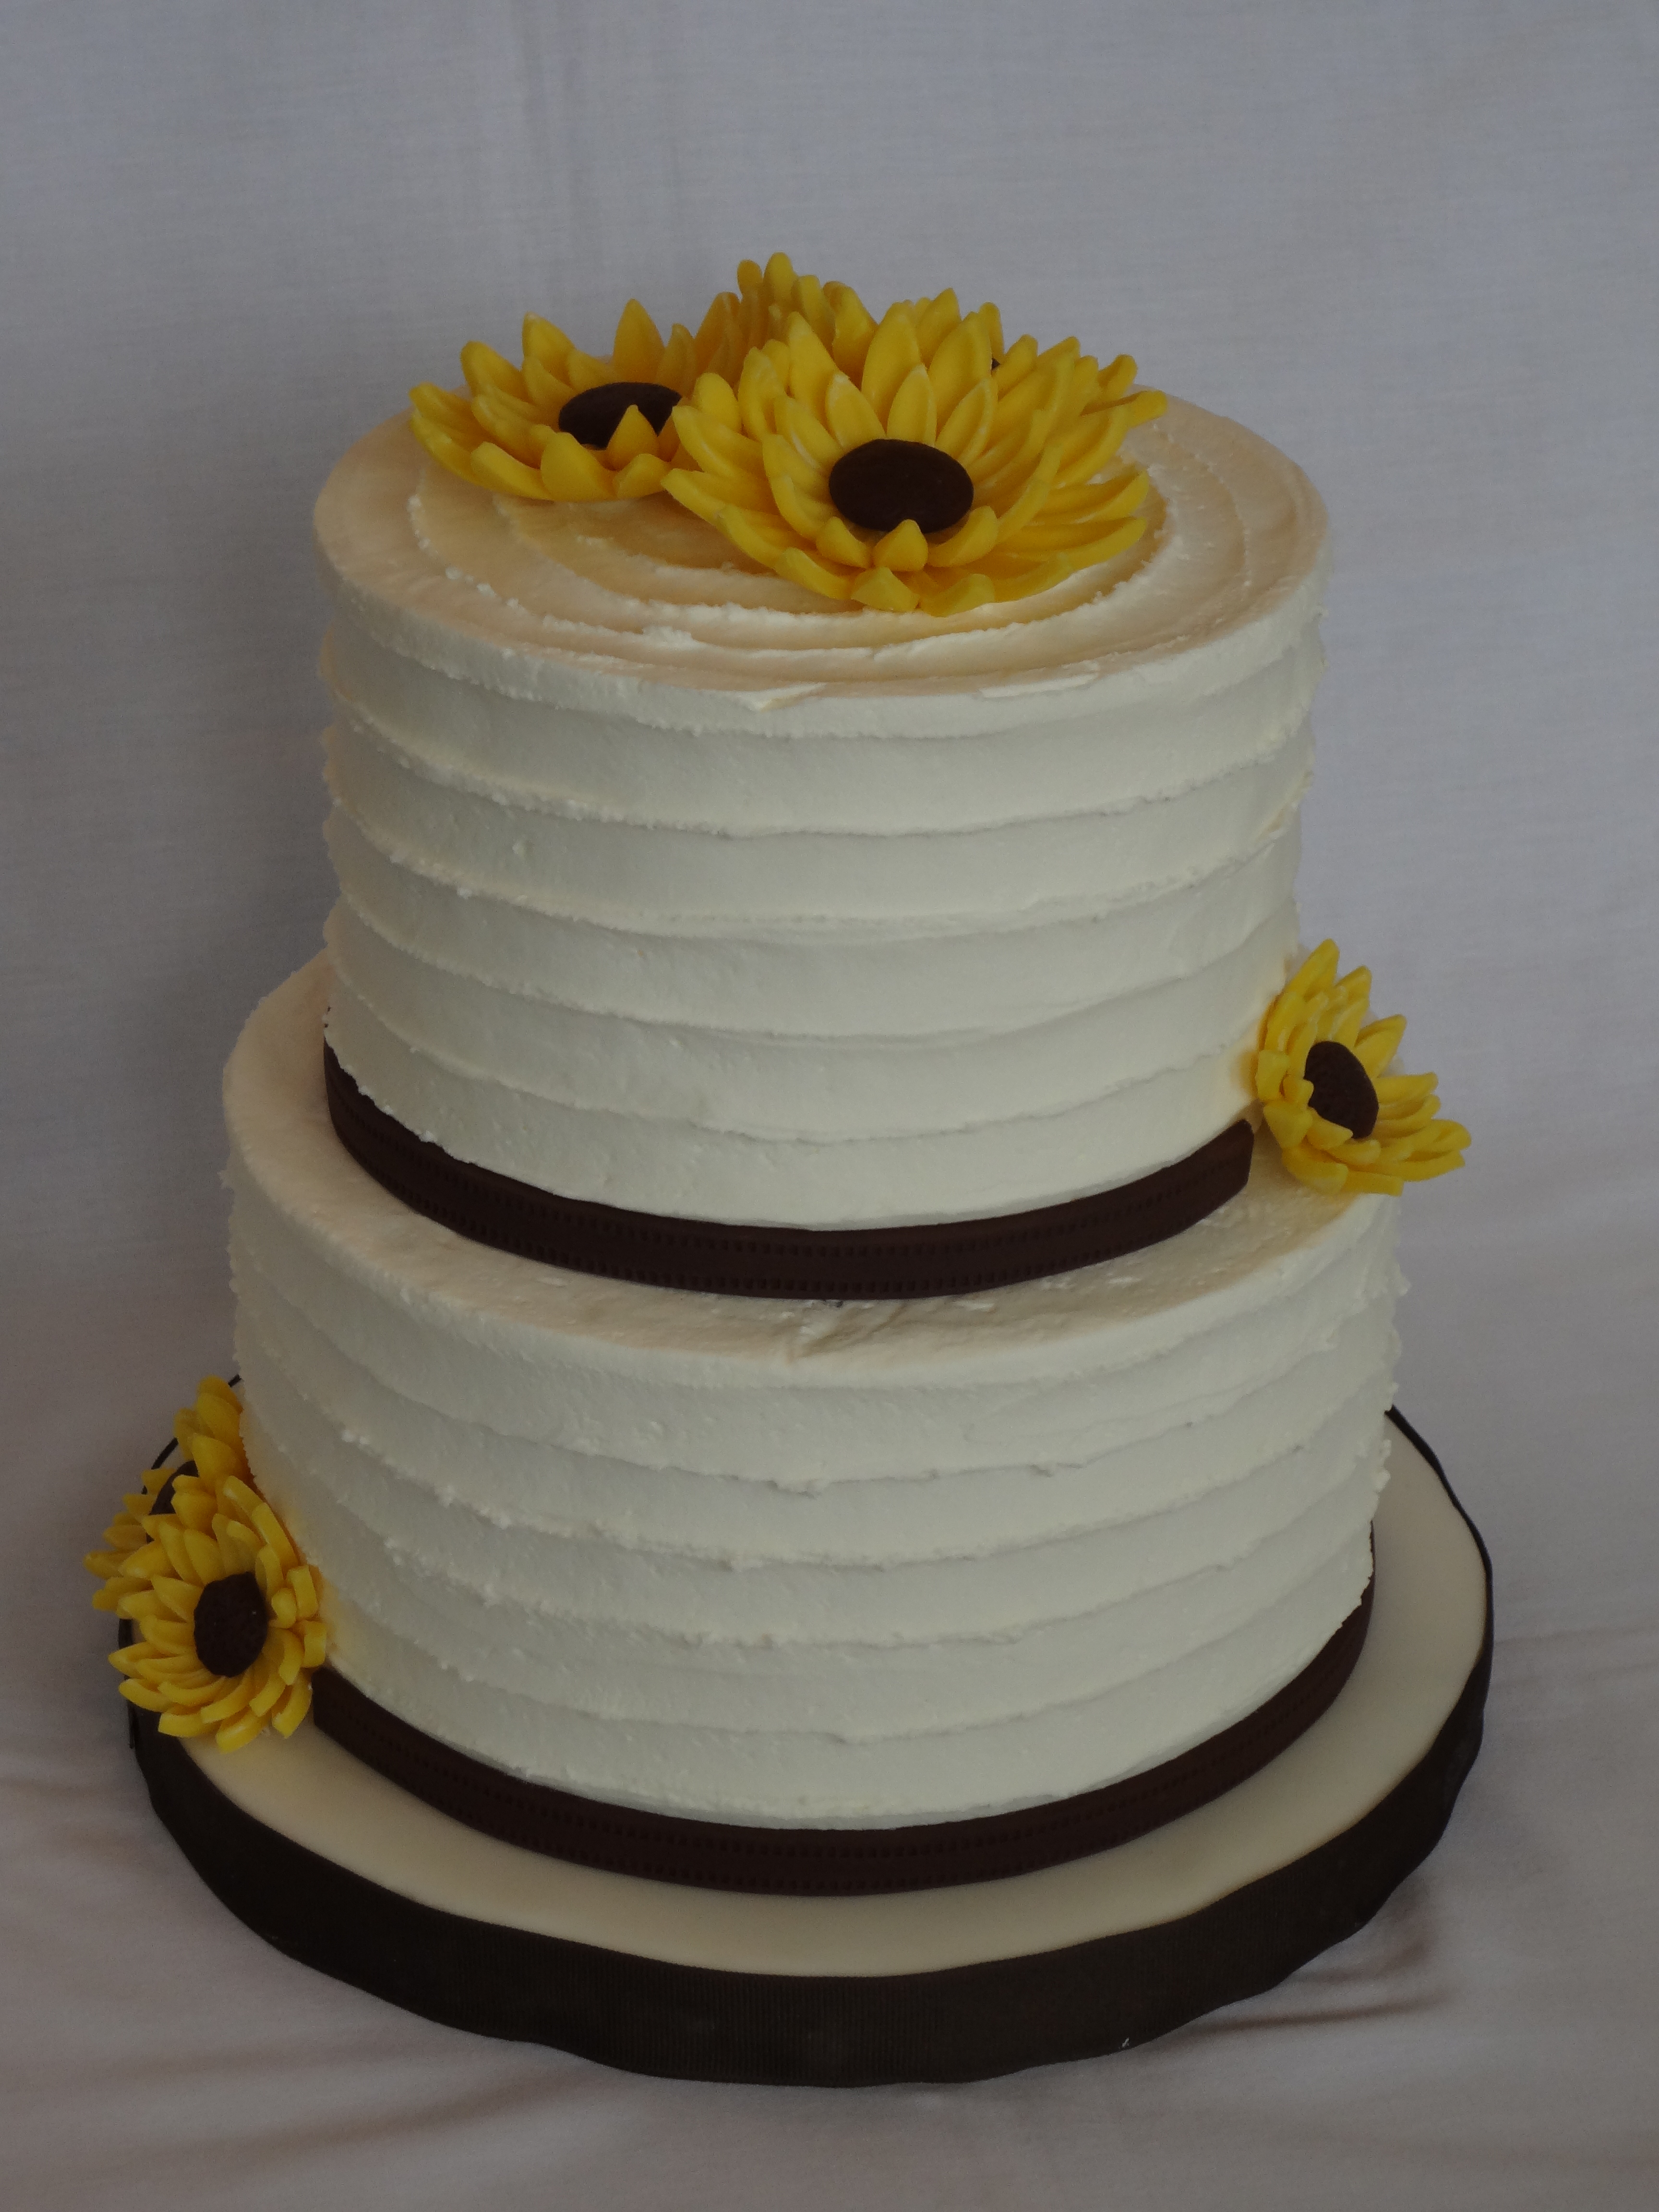 2 Tier Buttercream Cakes with Sunflowers